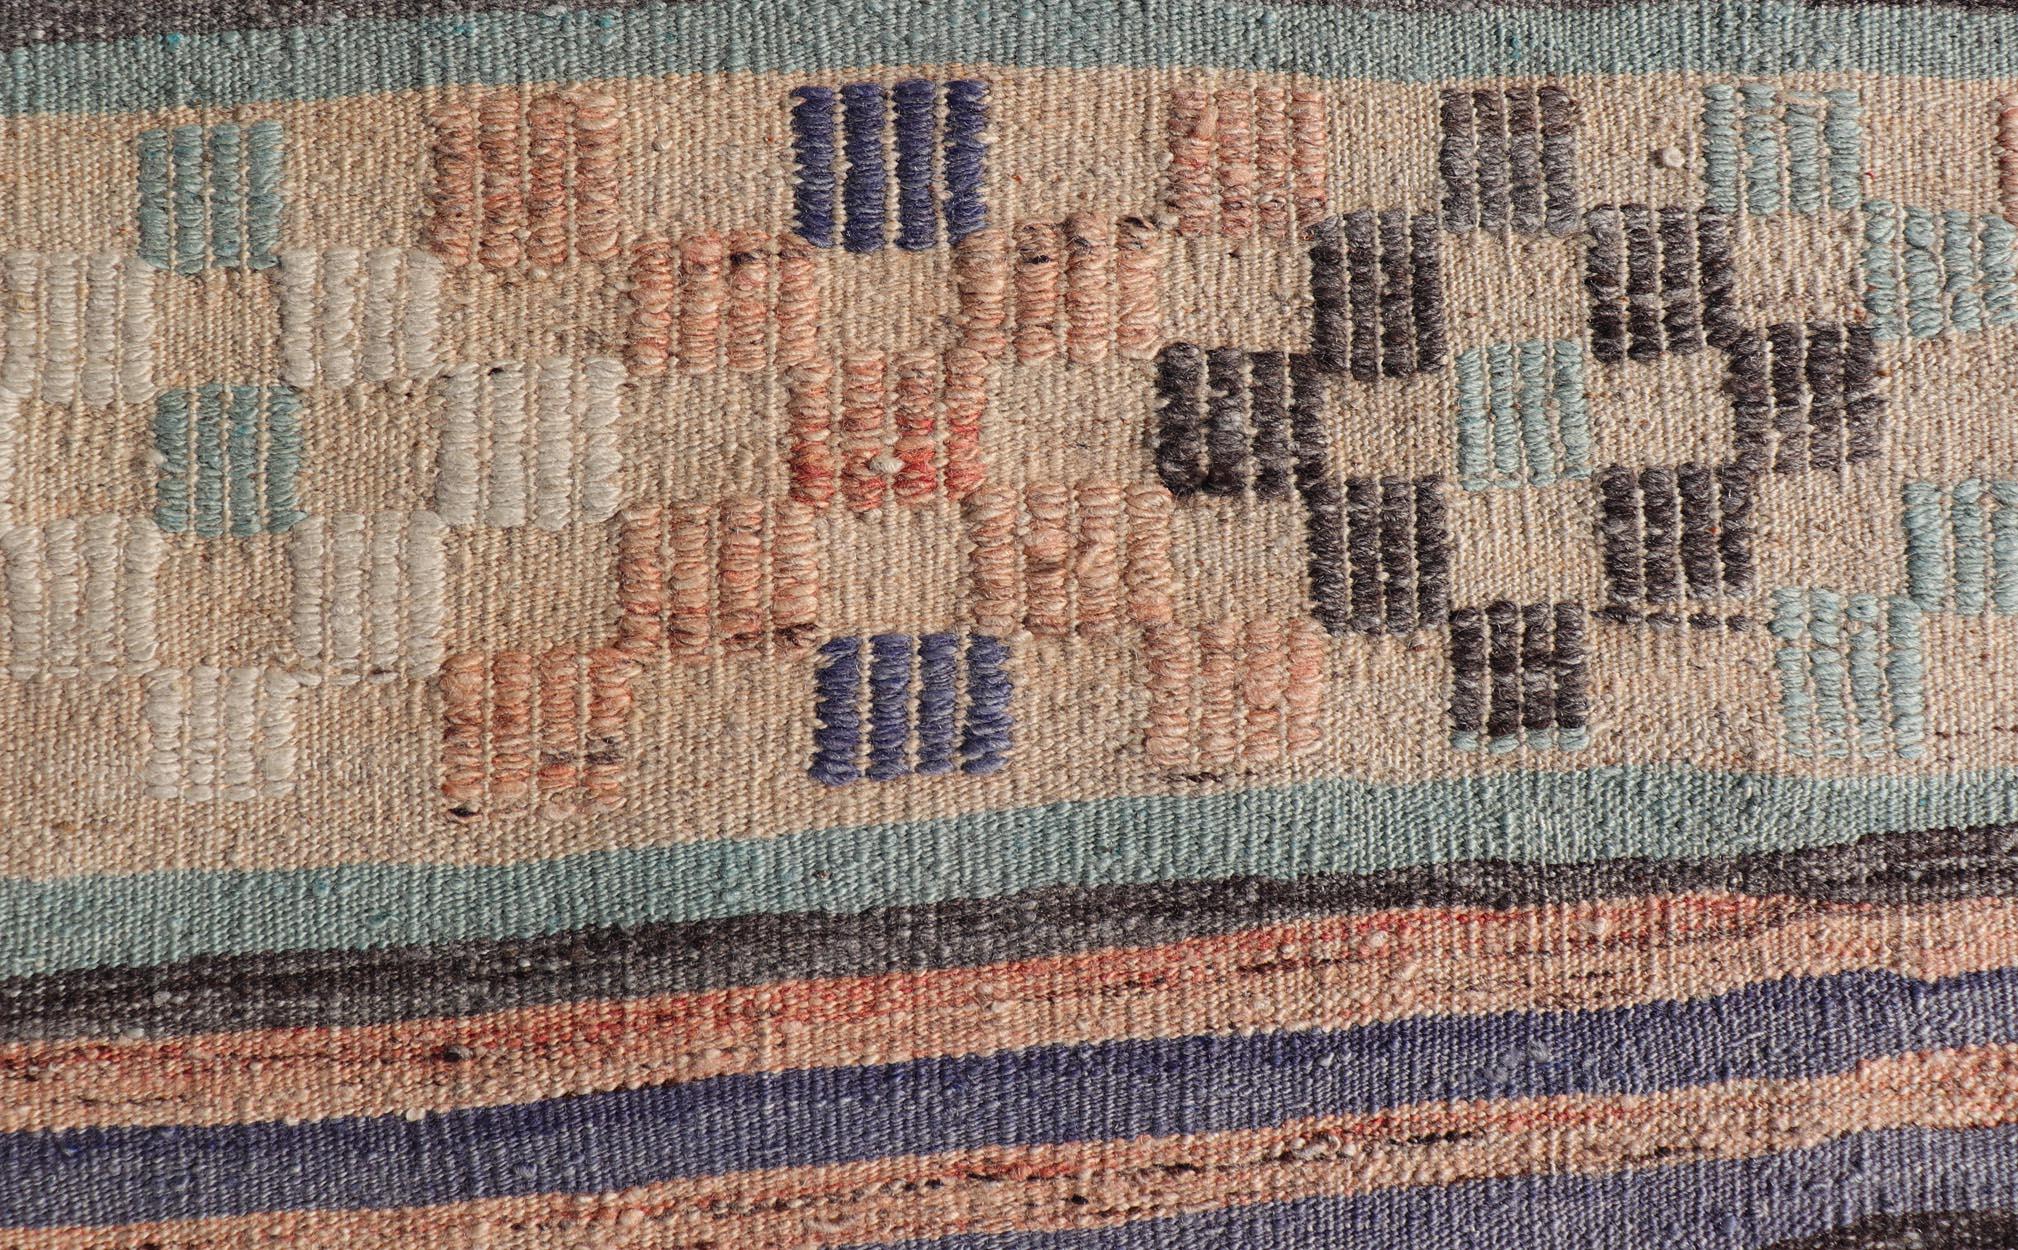 Measures: 3'1 x 5'7 
Stripe design Turkish vintage flat-weave rug in light green, purple, and peach. Keivan Woven Arts / rug TU-NED-5016, country of origin / type: Turkey / Kilim, circa 1960
This vintage Turkish Kilim rug features a contemporary